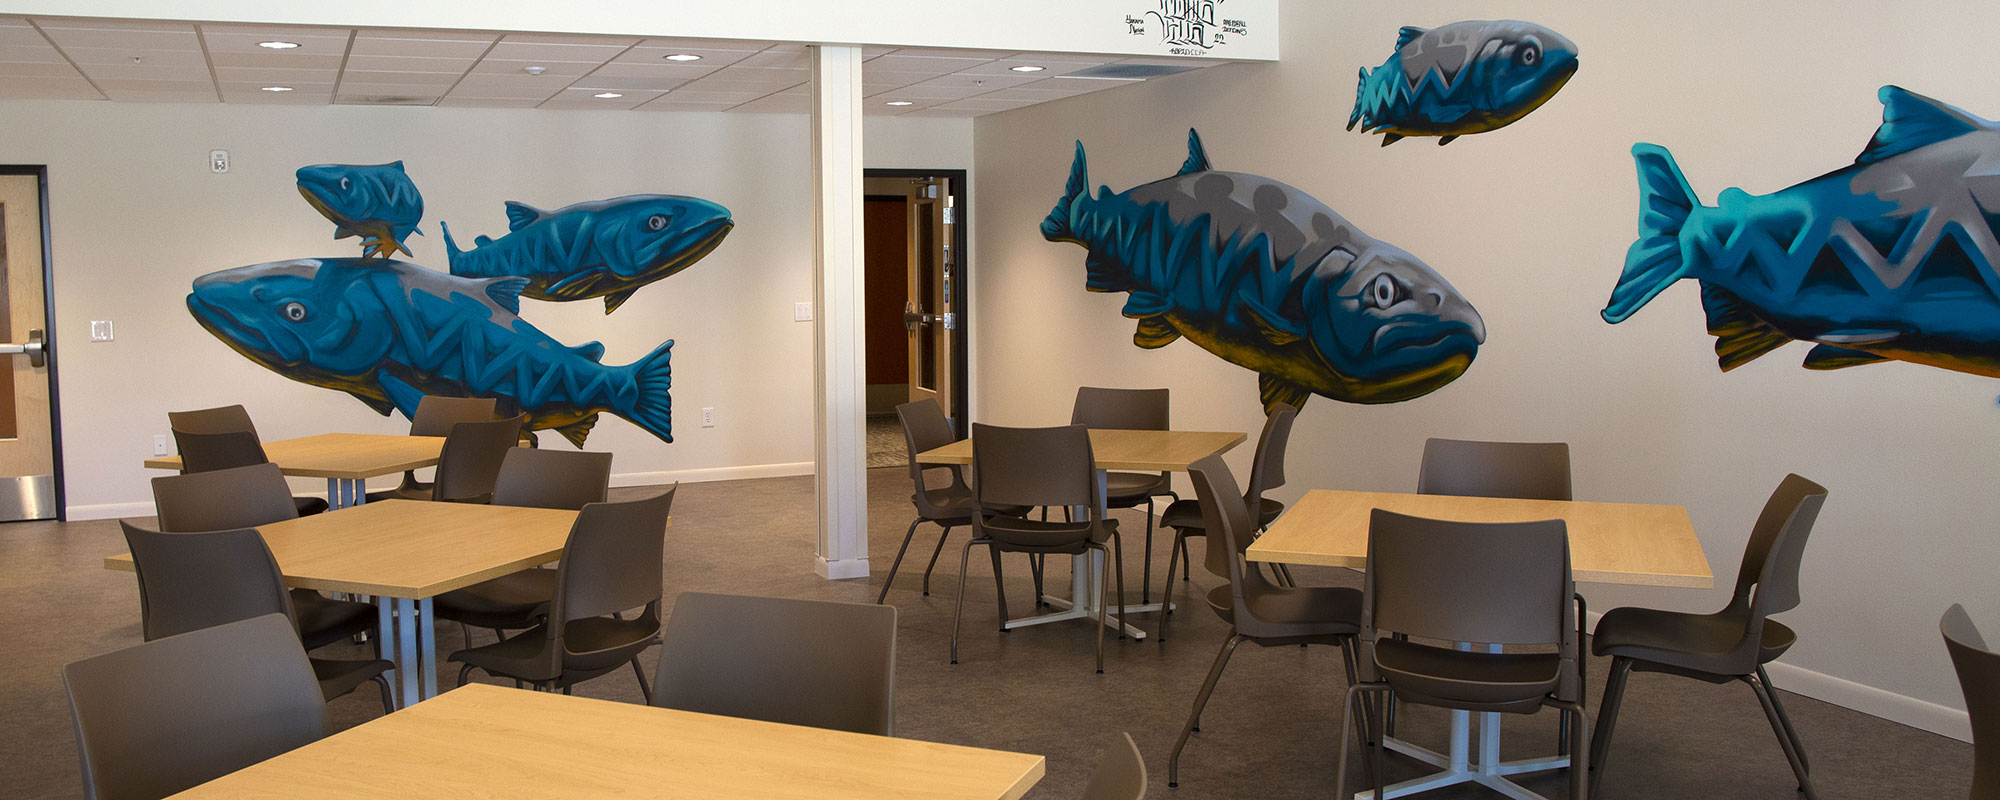 Dining room at Tukwila Springs - paintings swimming salmon decorate the walls